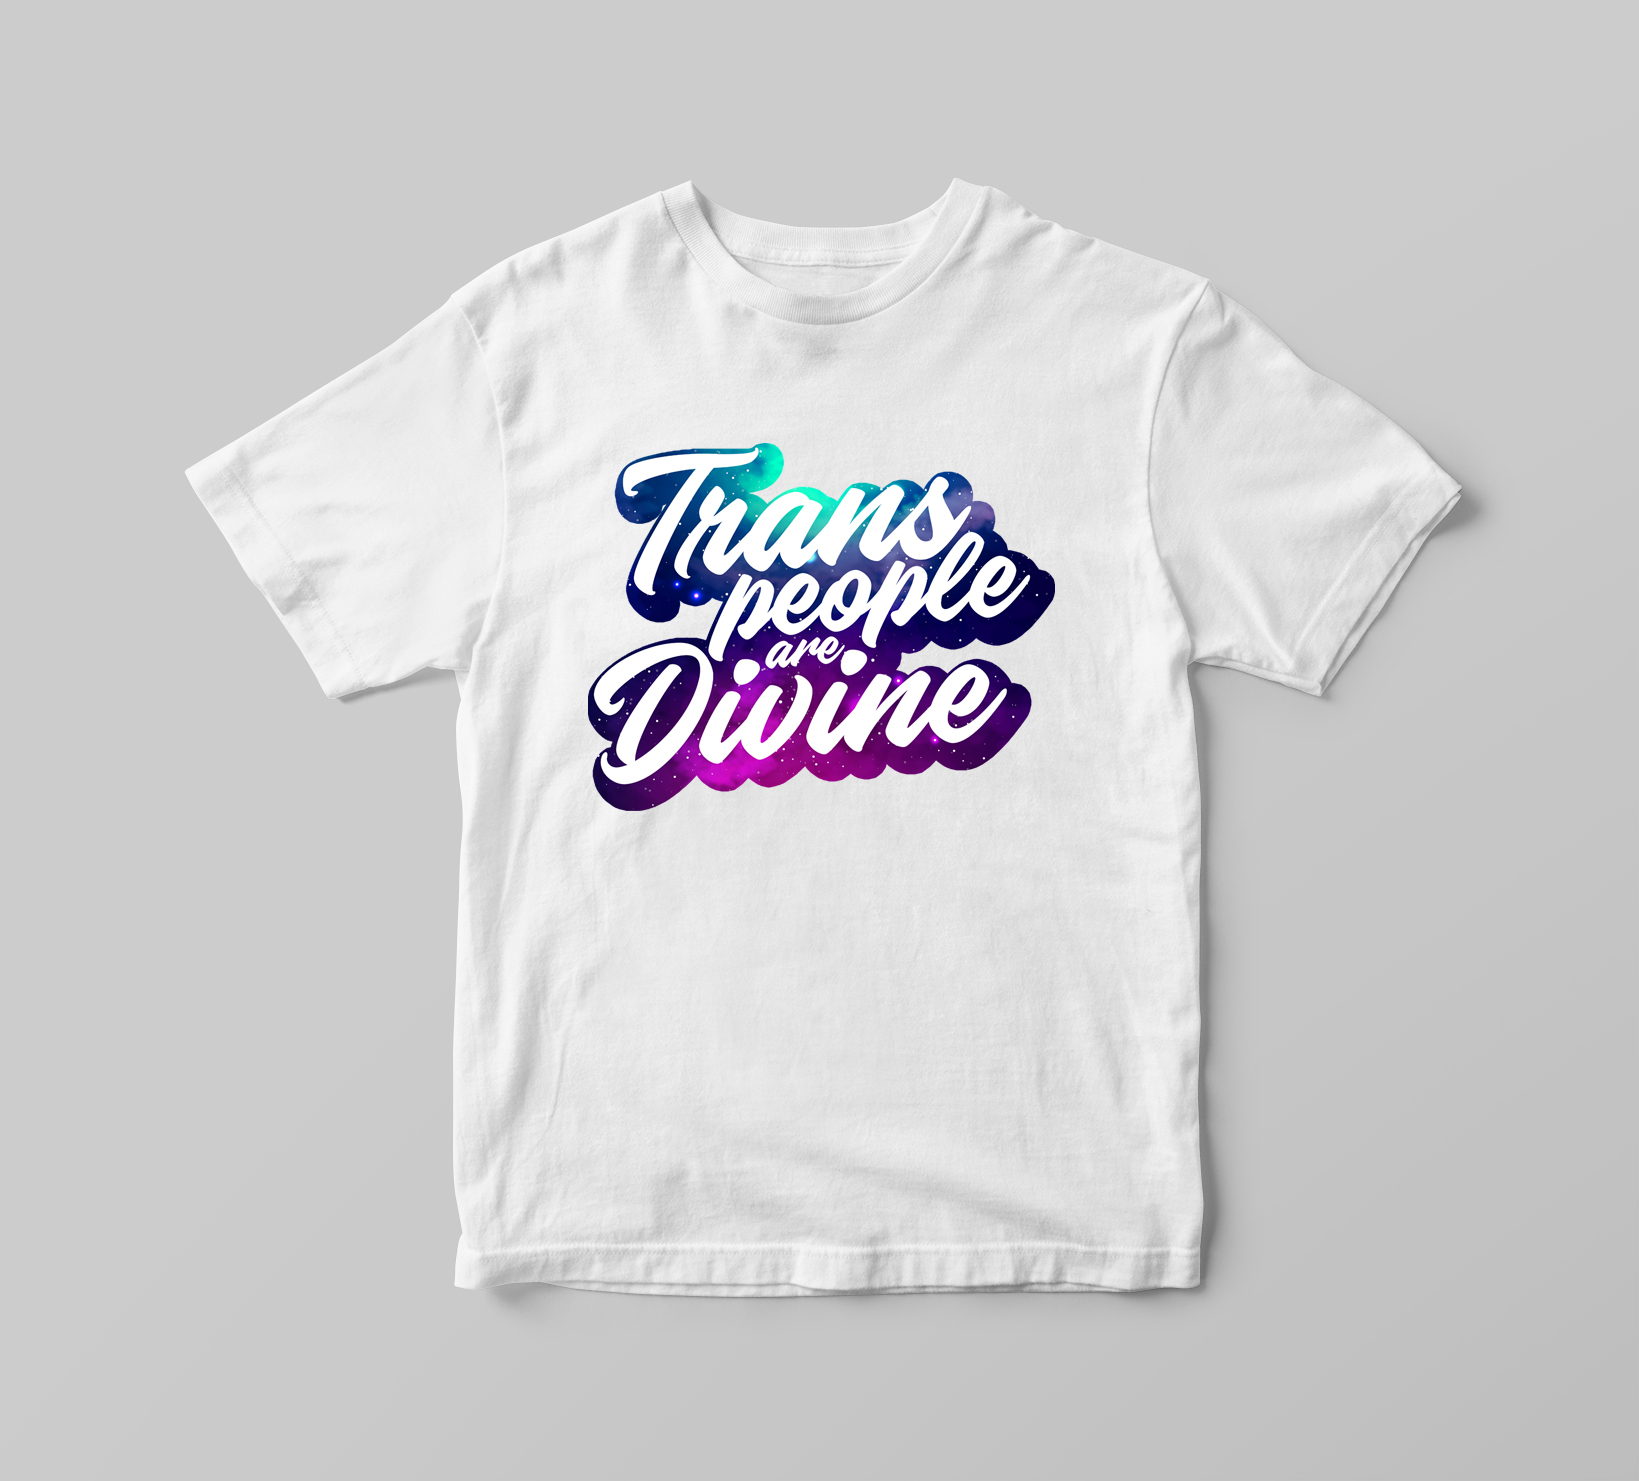 Trans People are divine - T-shirt - Trans Rights - Queer Rights - BIPOC QTPOC